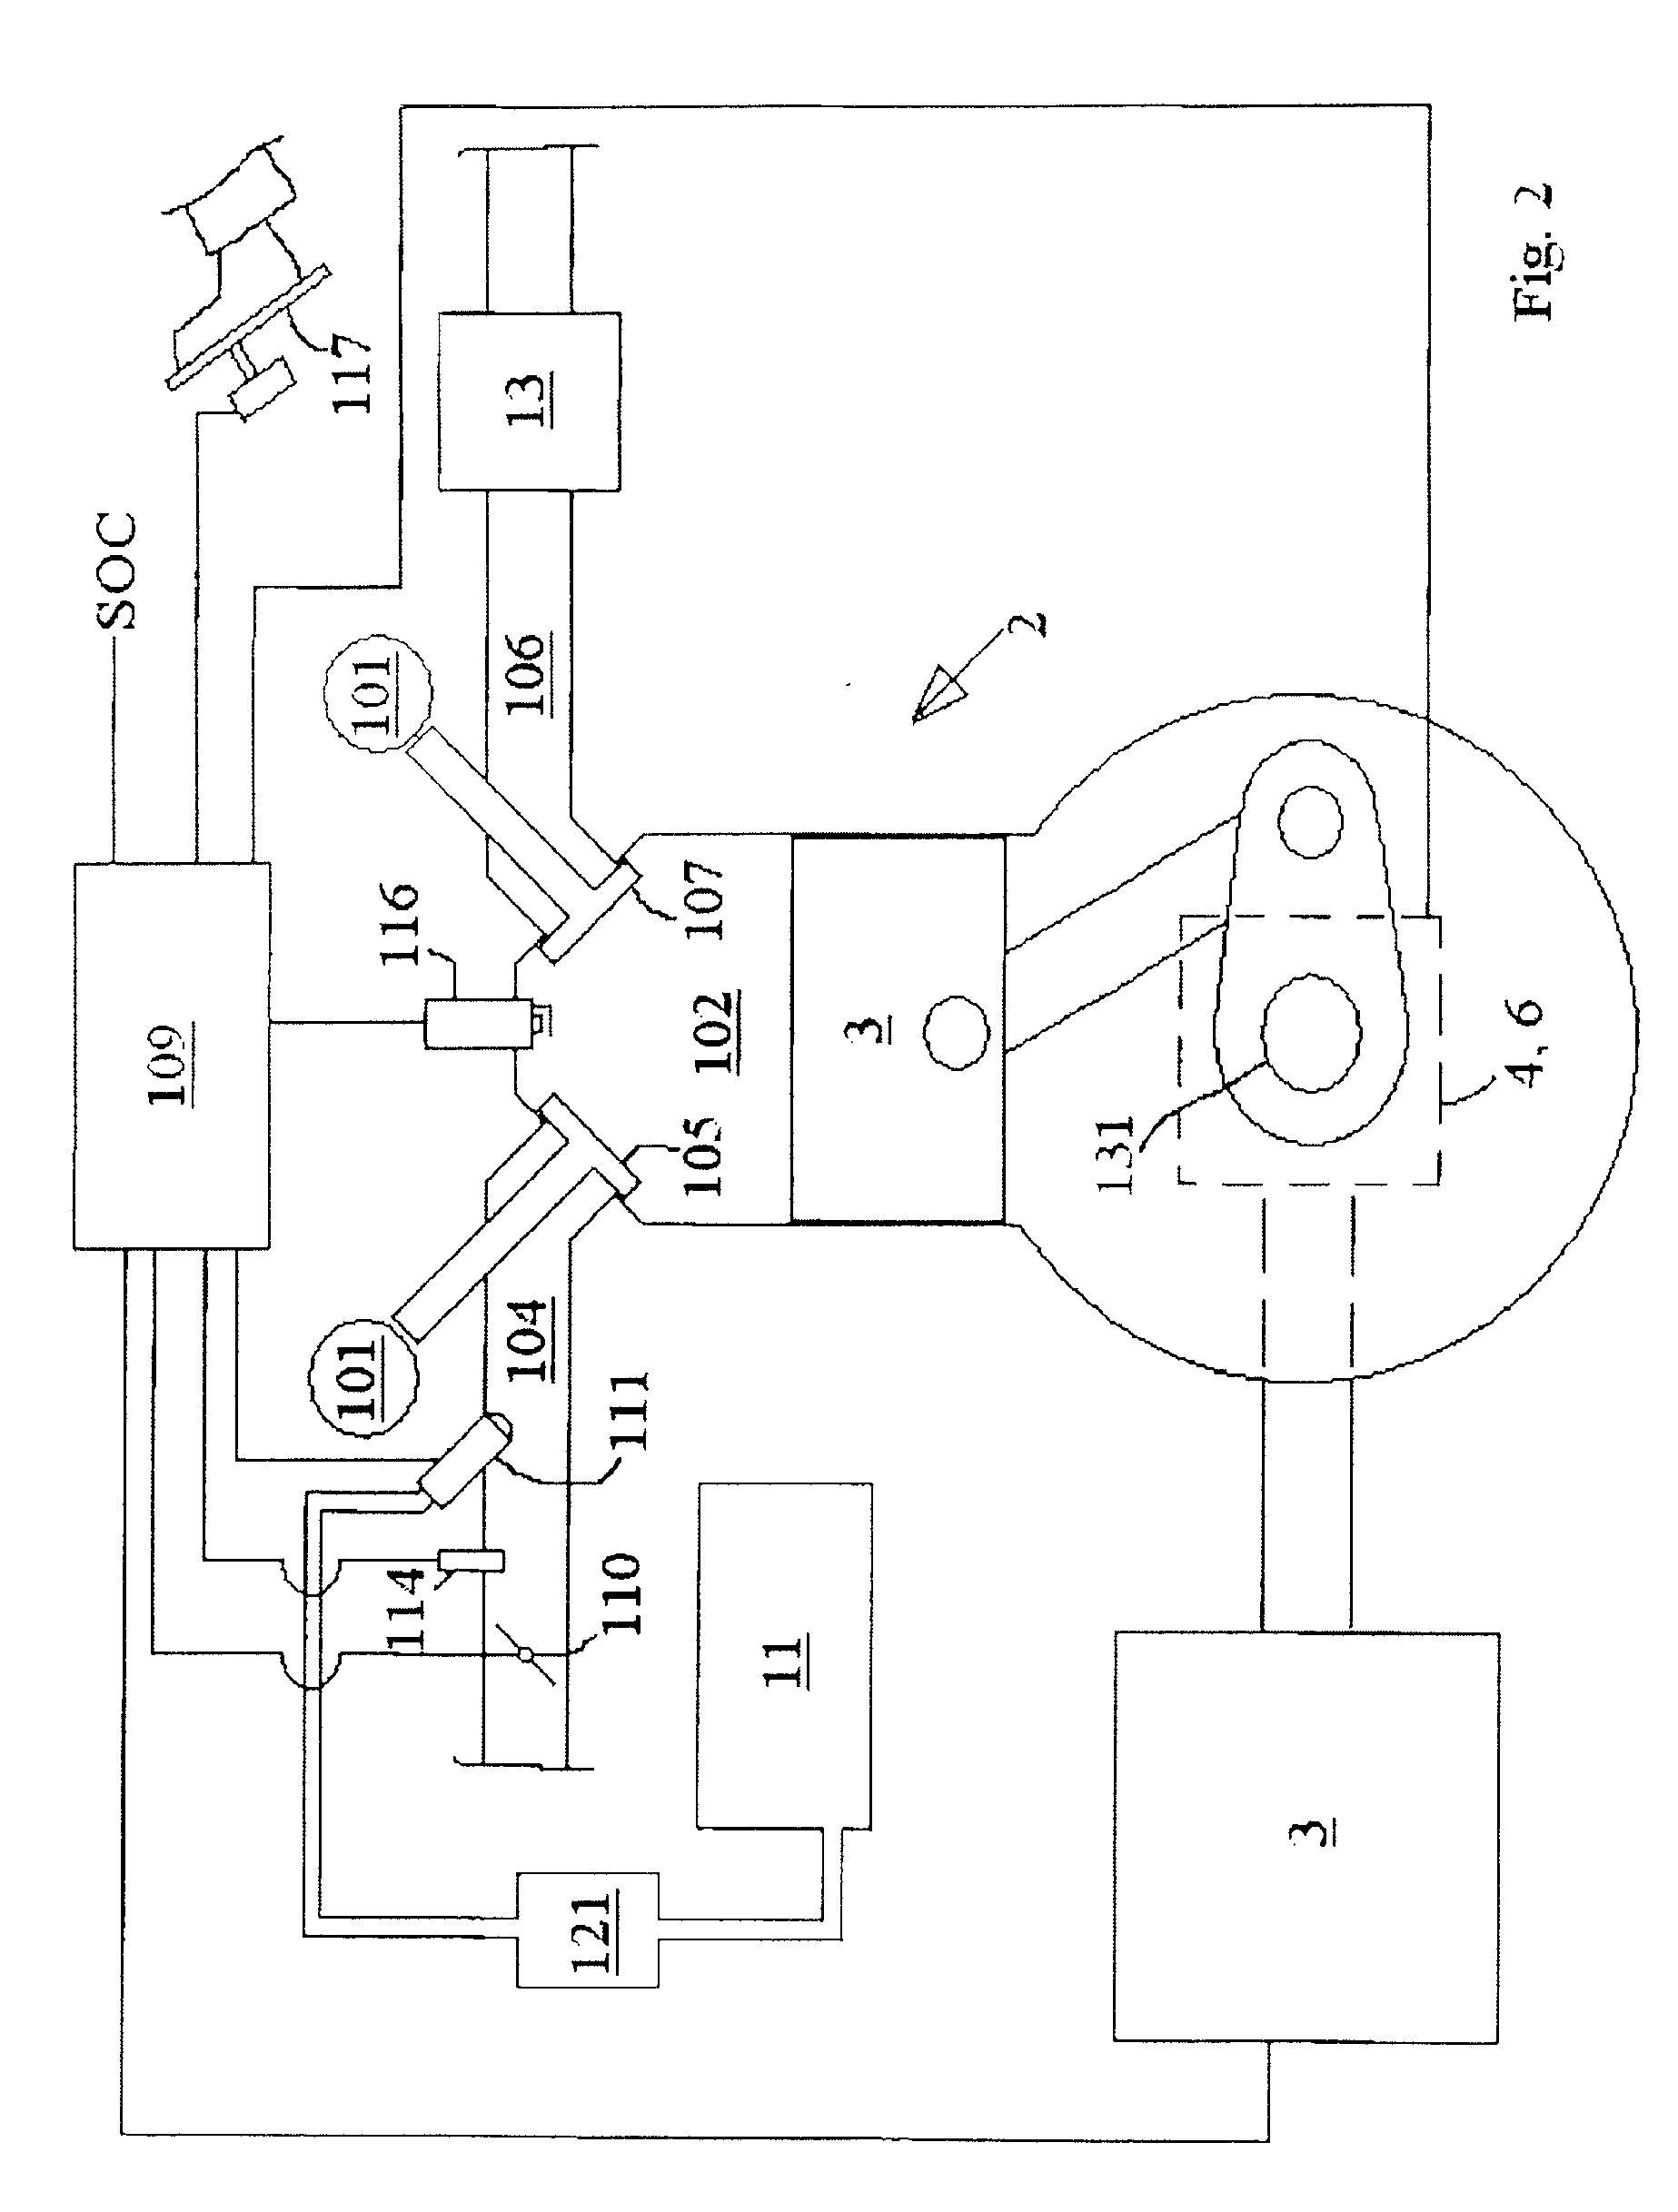 Control of an Exhaust Gas Aftertreatment Device in a Hybrid Vehicle